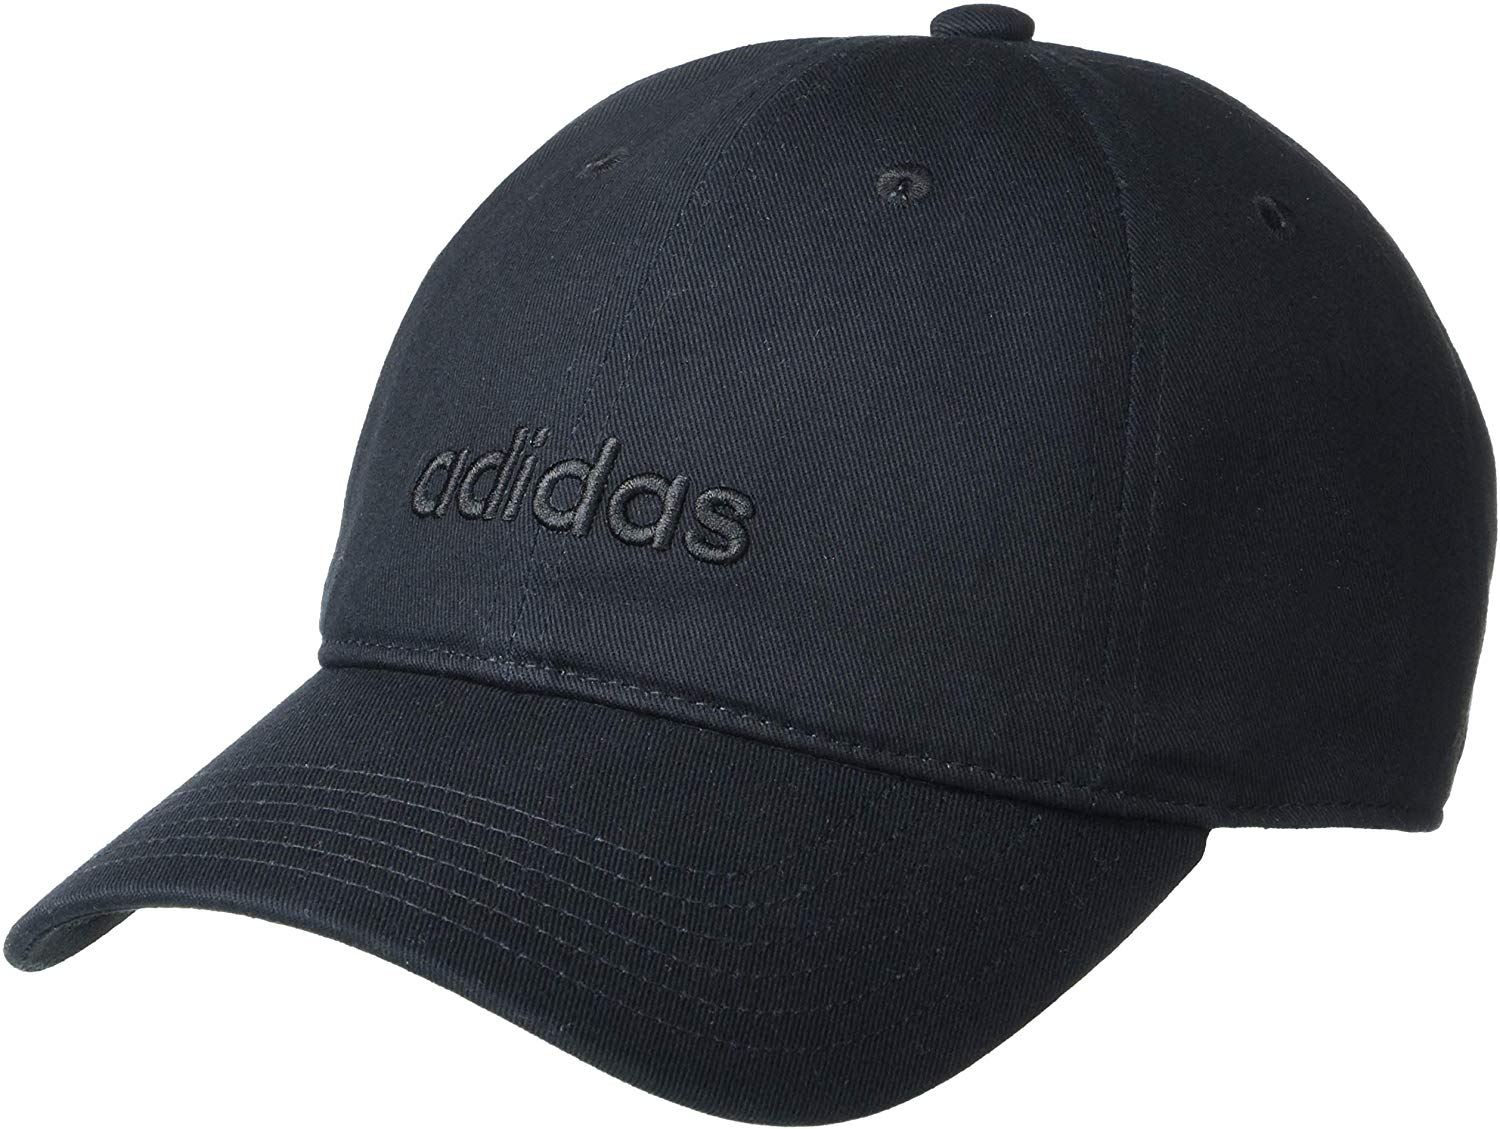 Adidas Womens Contender Relaxed Adjustable Golf Caps